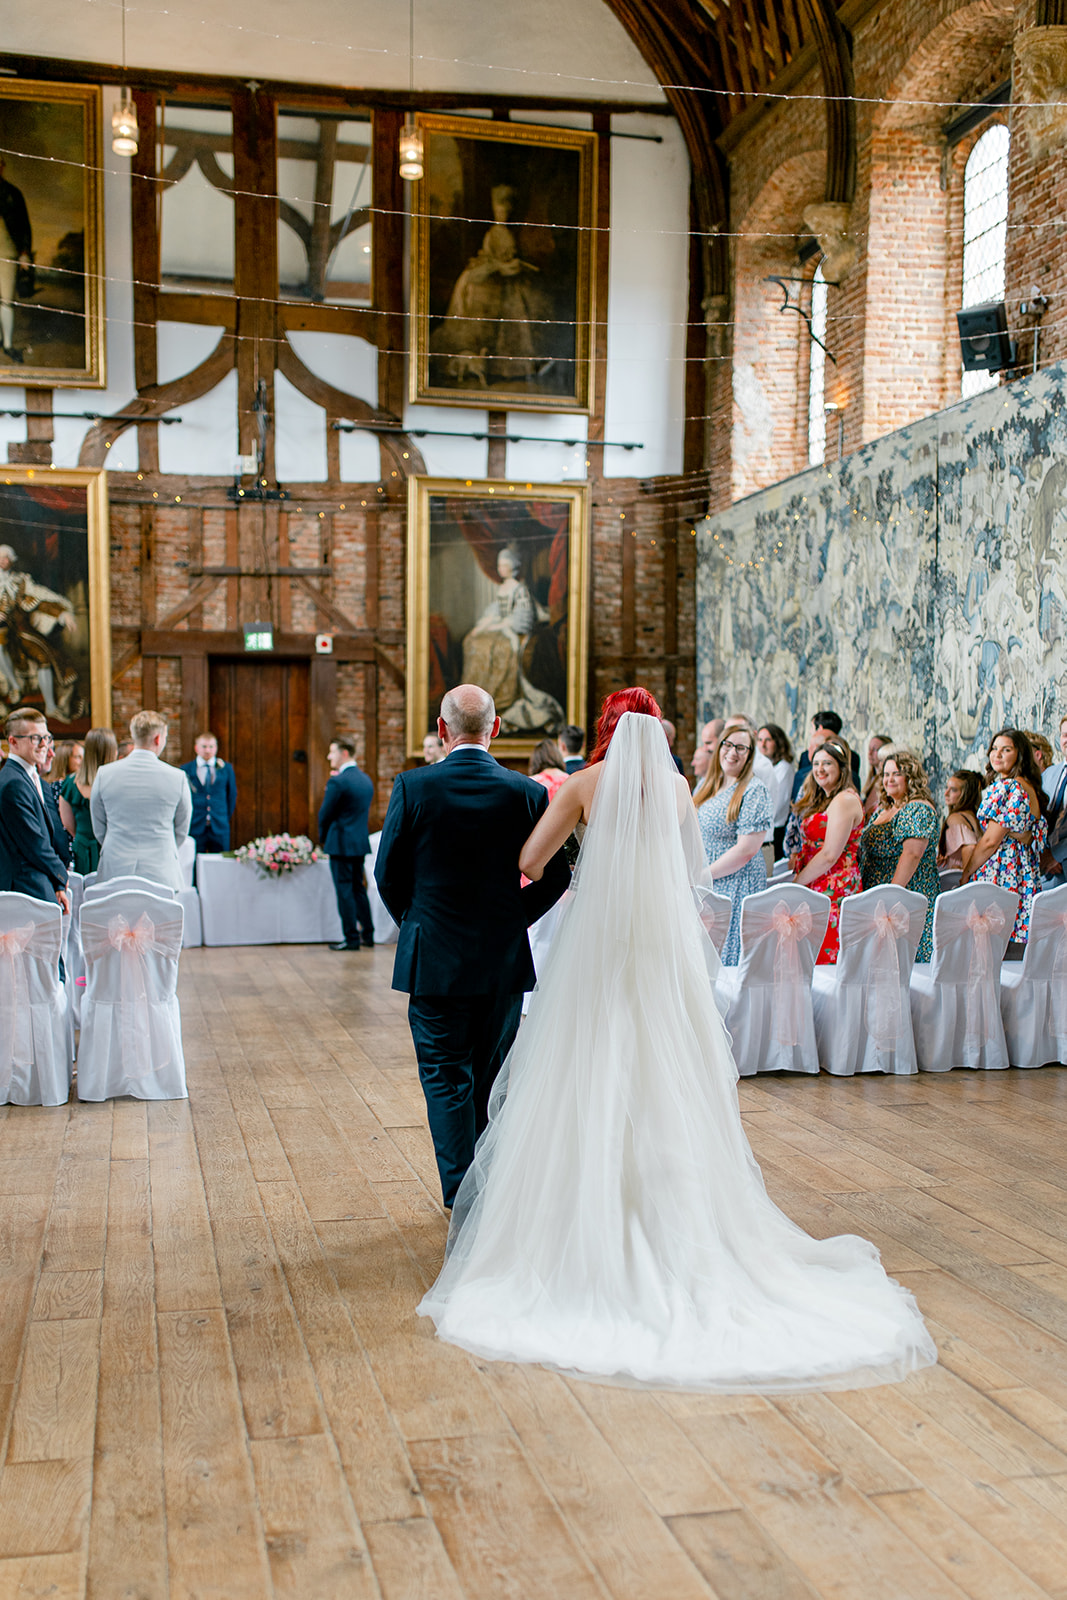 A wedding blessing in front of family and friends at Hatfield House.